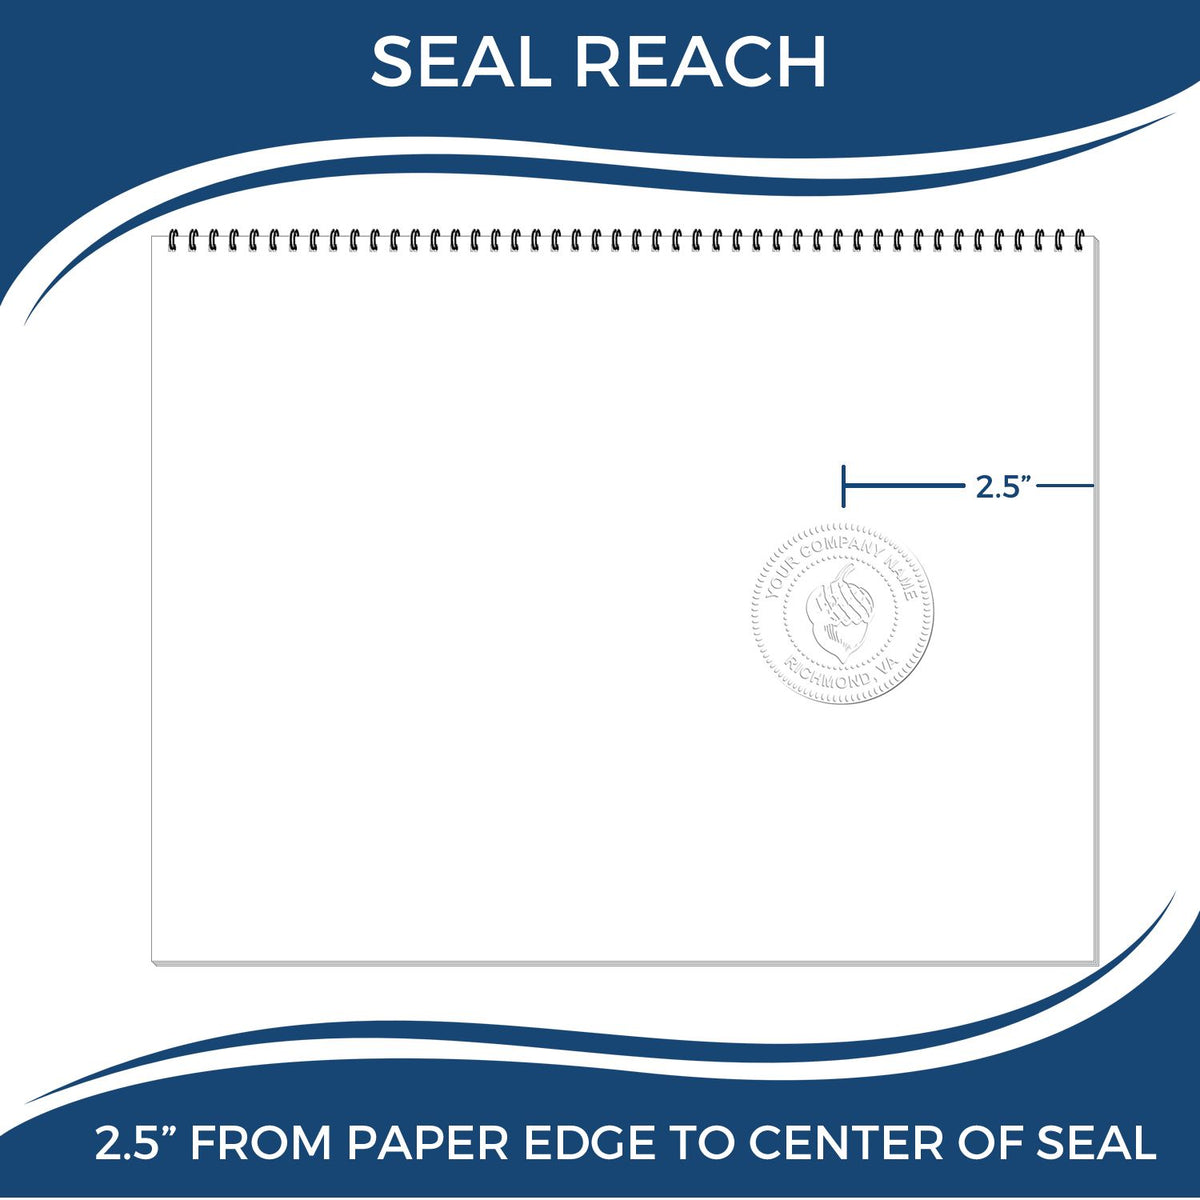 An infographic showing the seal reach which is represented by a ruler and a miniature seal image of the State of Arizona Long Reach Architectural Embossing Seal